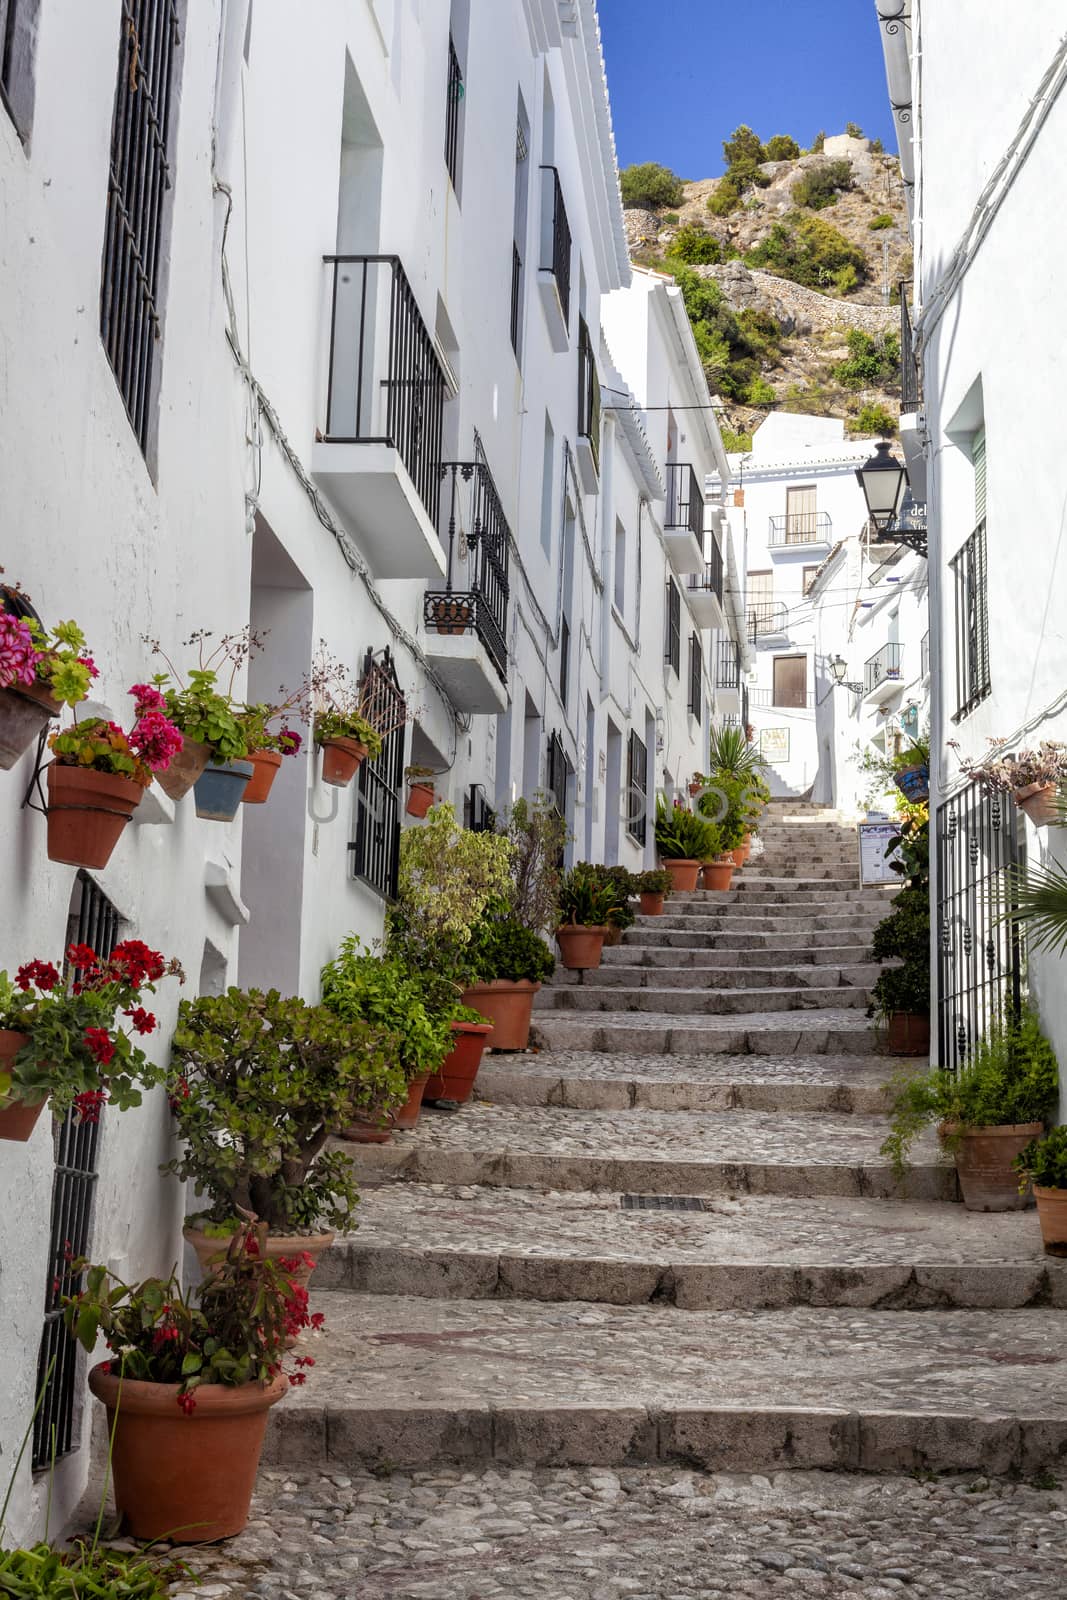 Small alley in a old town in Andalusia, Spain. Pavers and plants by Tjeerdkruse